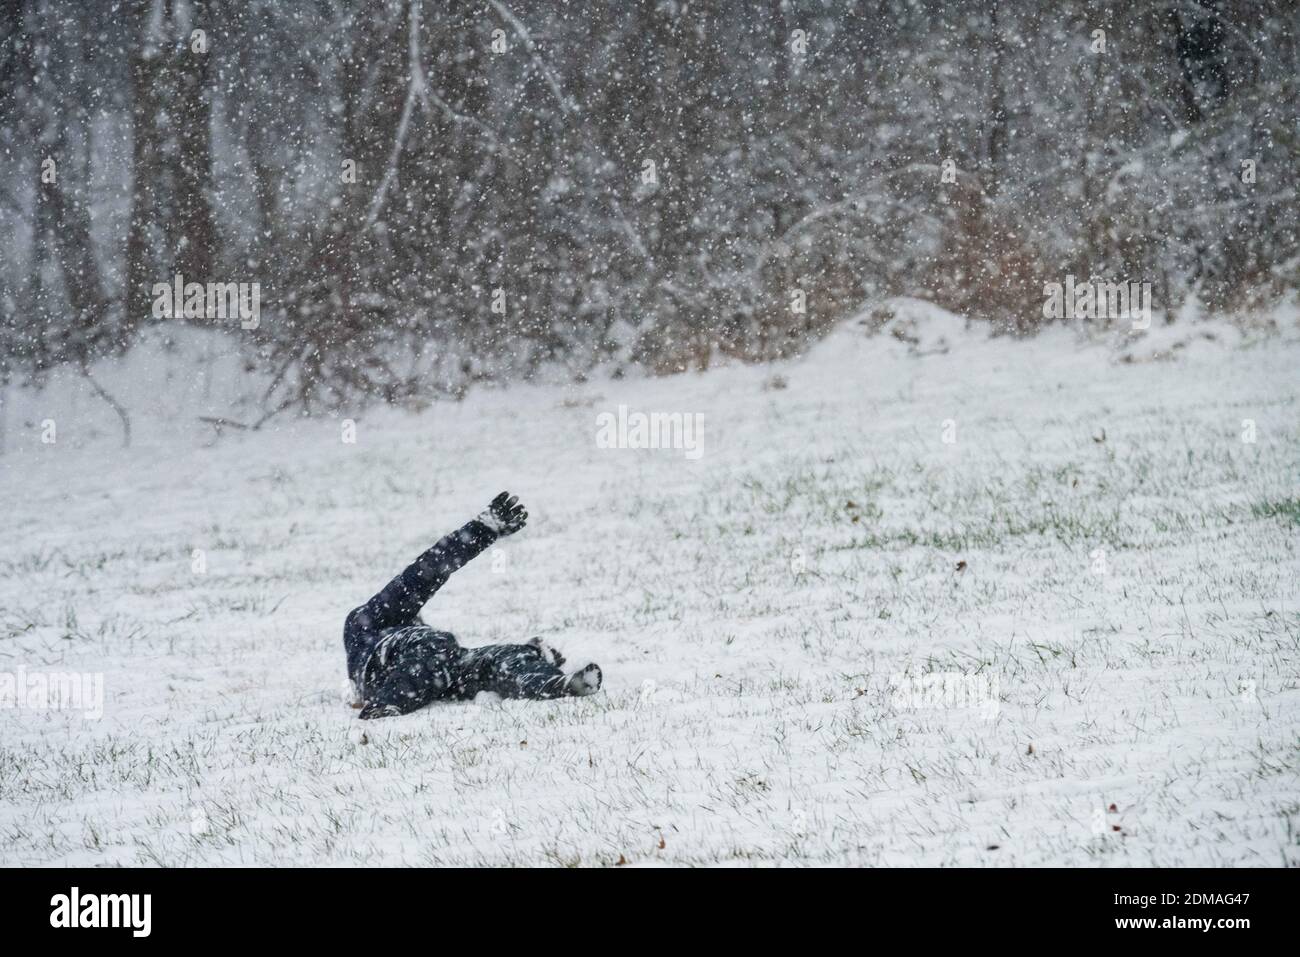 Philadelphia, Pennsylvania, USA. 16th Dec, 2020. Local Germantown youth play in the snow in a neighborhood park as Philadelphians brace for the first major snow storm in over 1000 days. Credit: Christopher Evens/ZUMA Wire/Alamy Live News Stock Photo